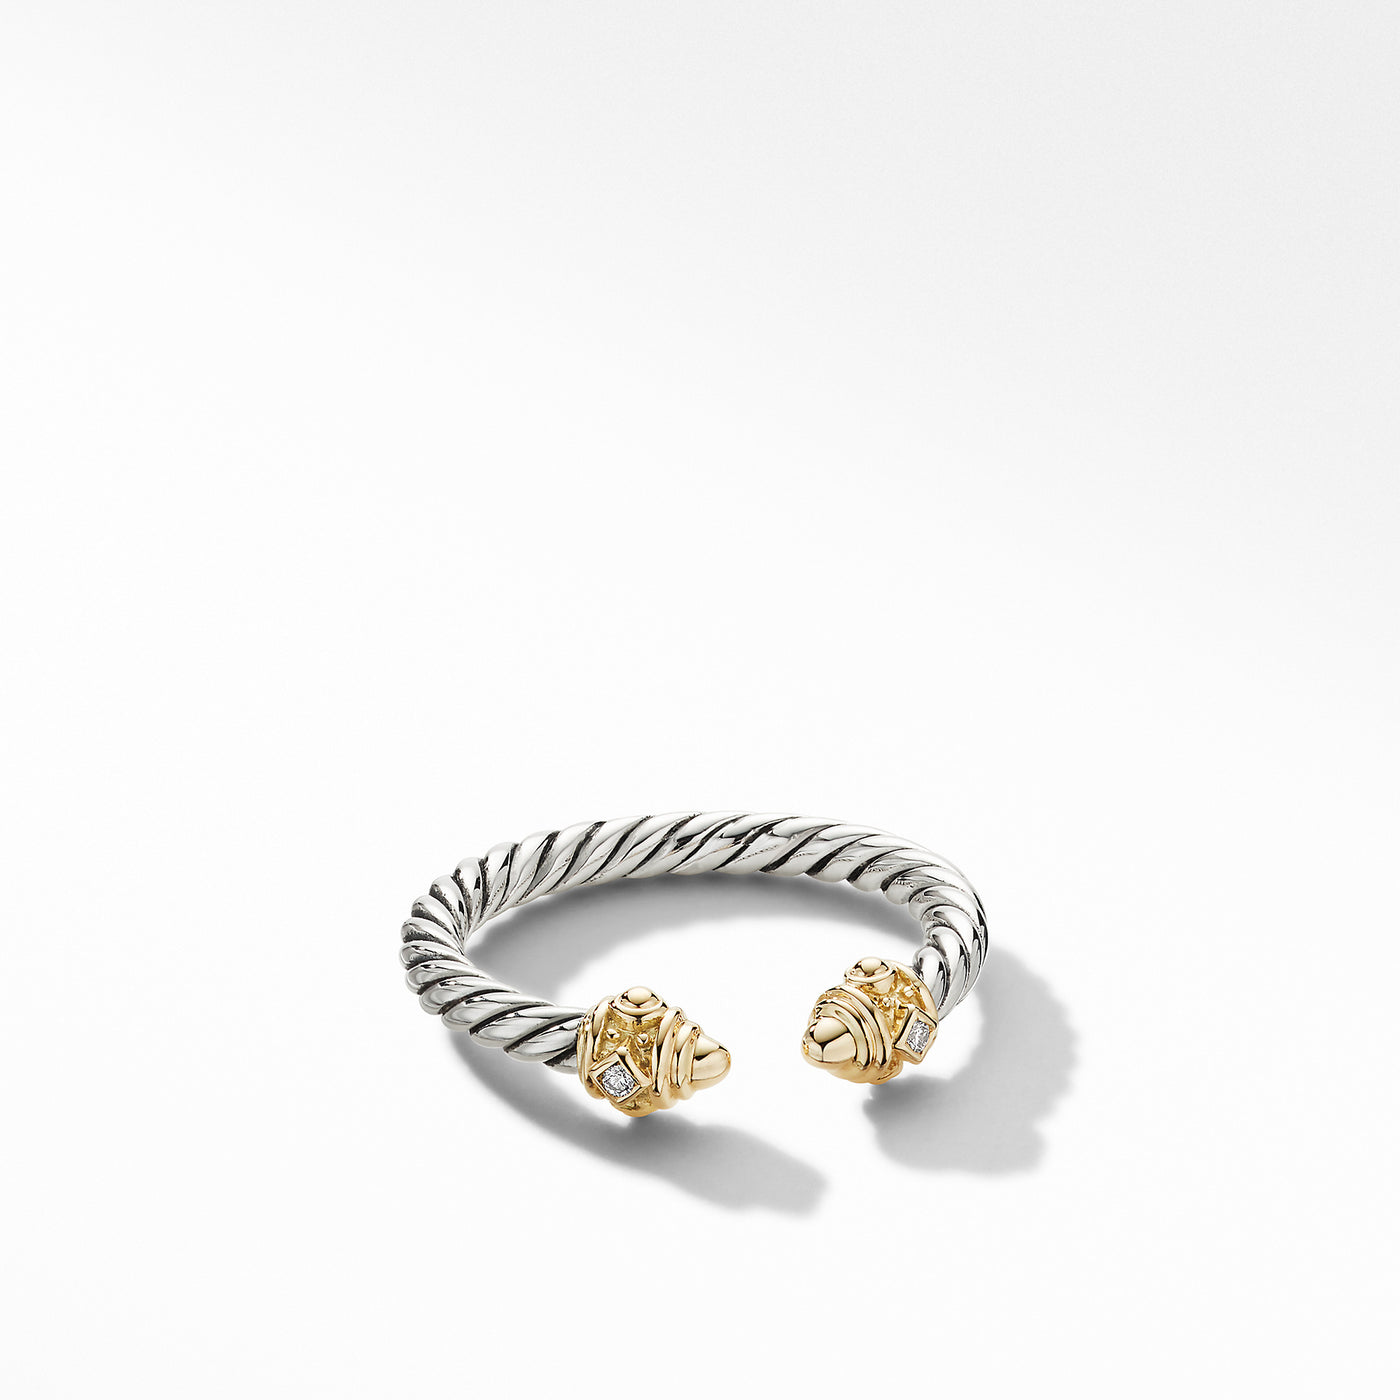 Renaissance Ring in Sterling Silver with 14K Yellow Gold\, Gold Domes and Diamonds\, 2.3mm